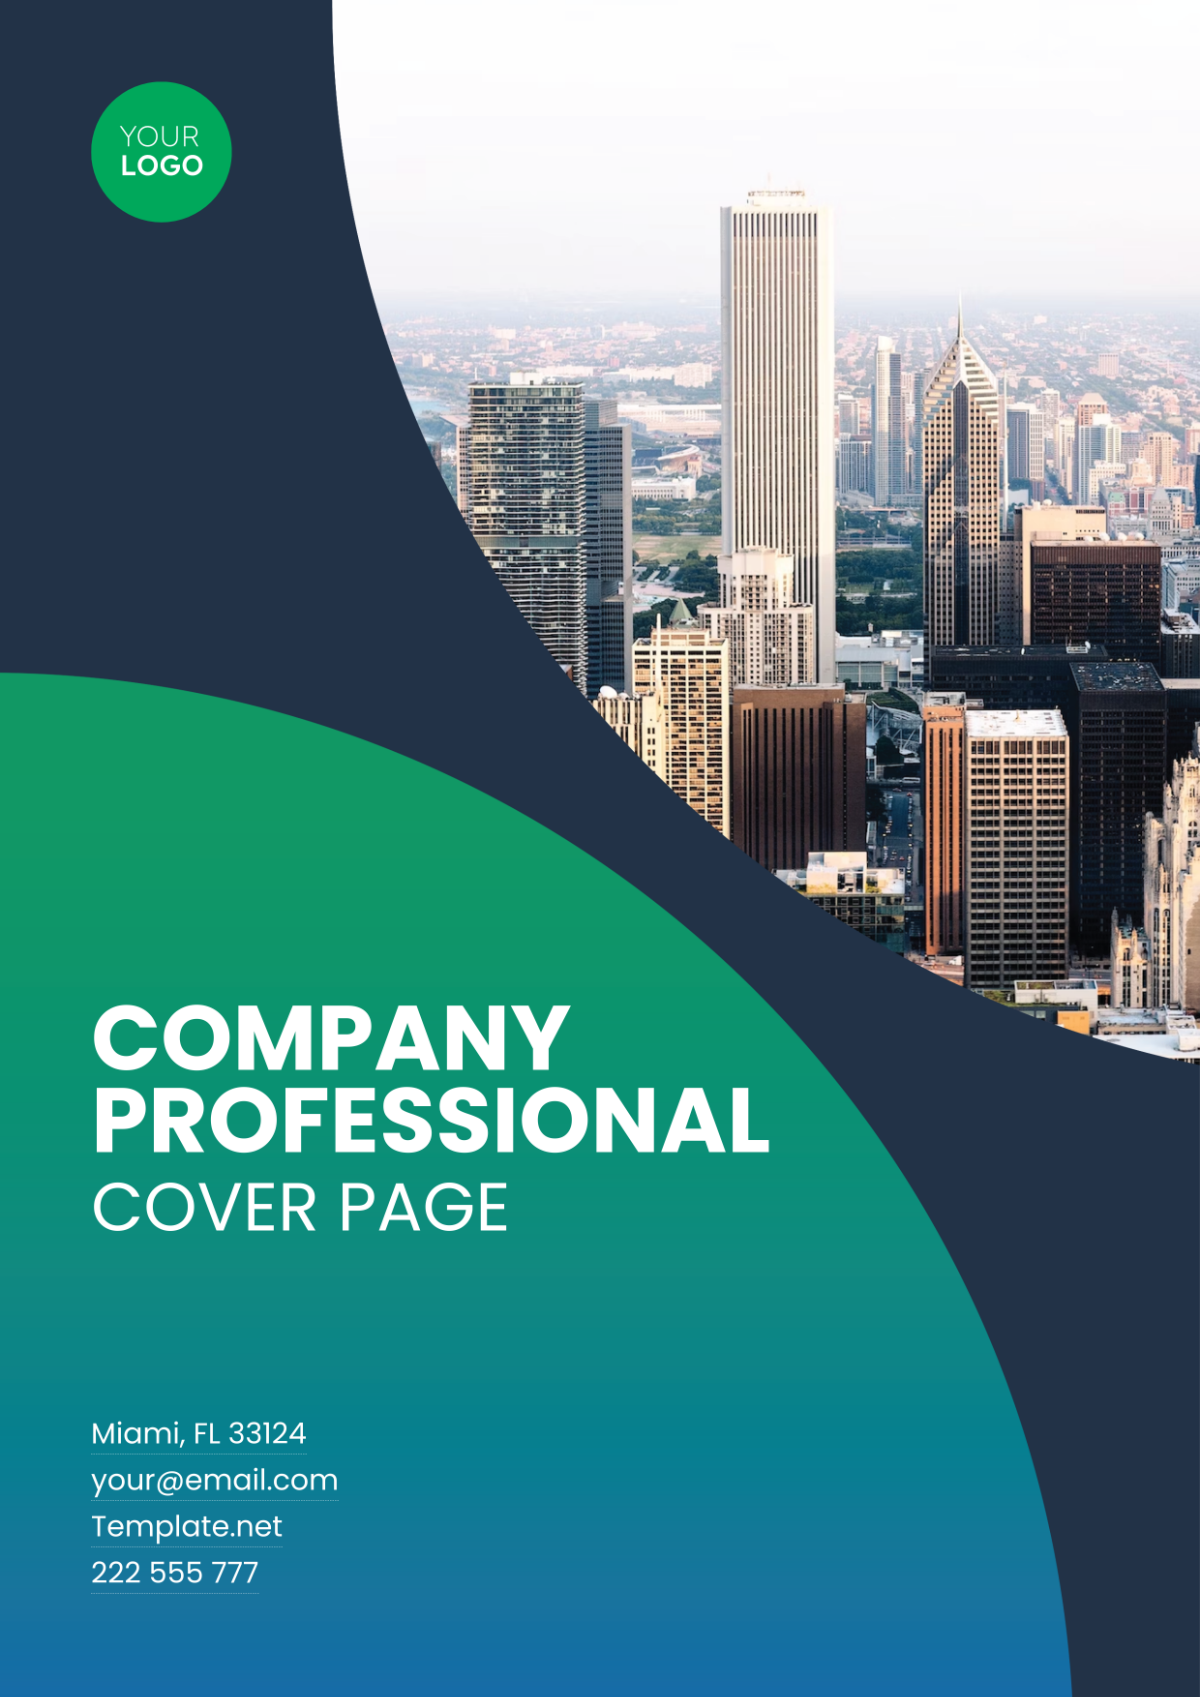 Company Professional Cover Page Template - Edit Online & Download 